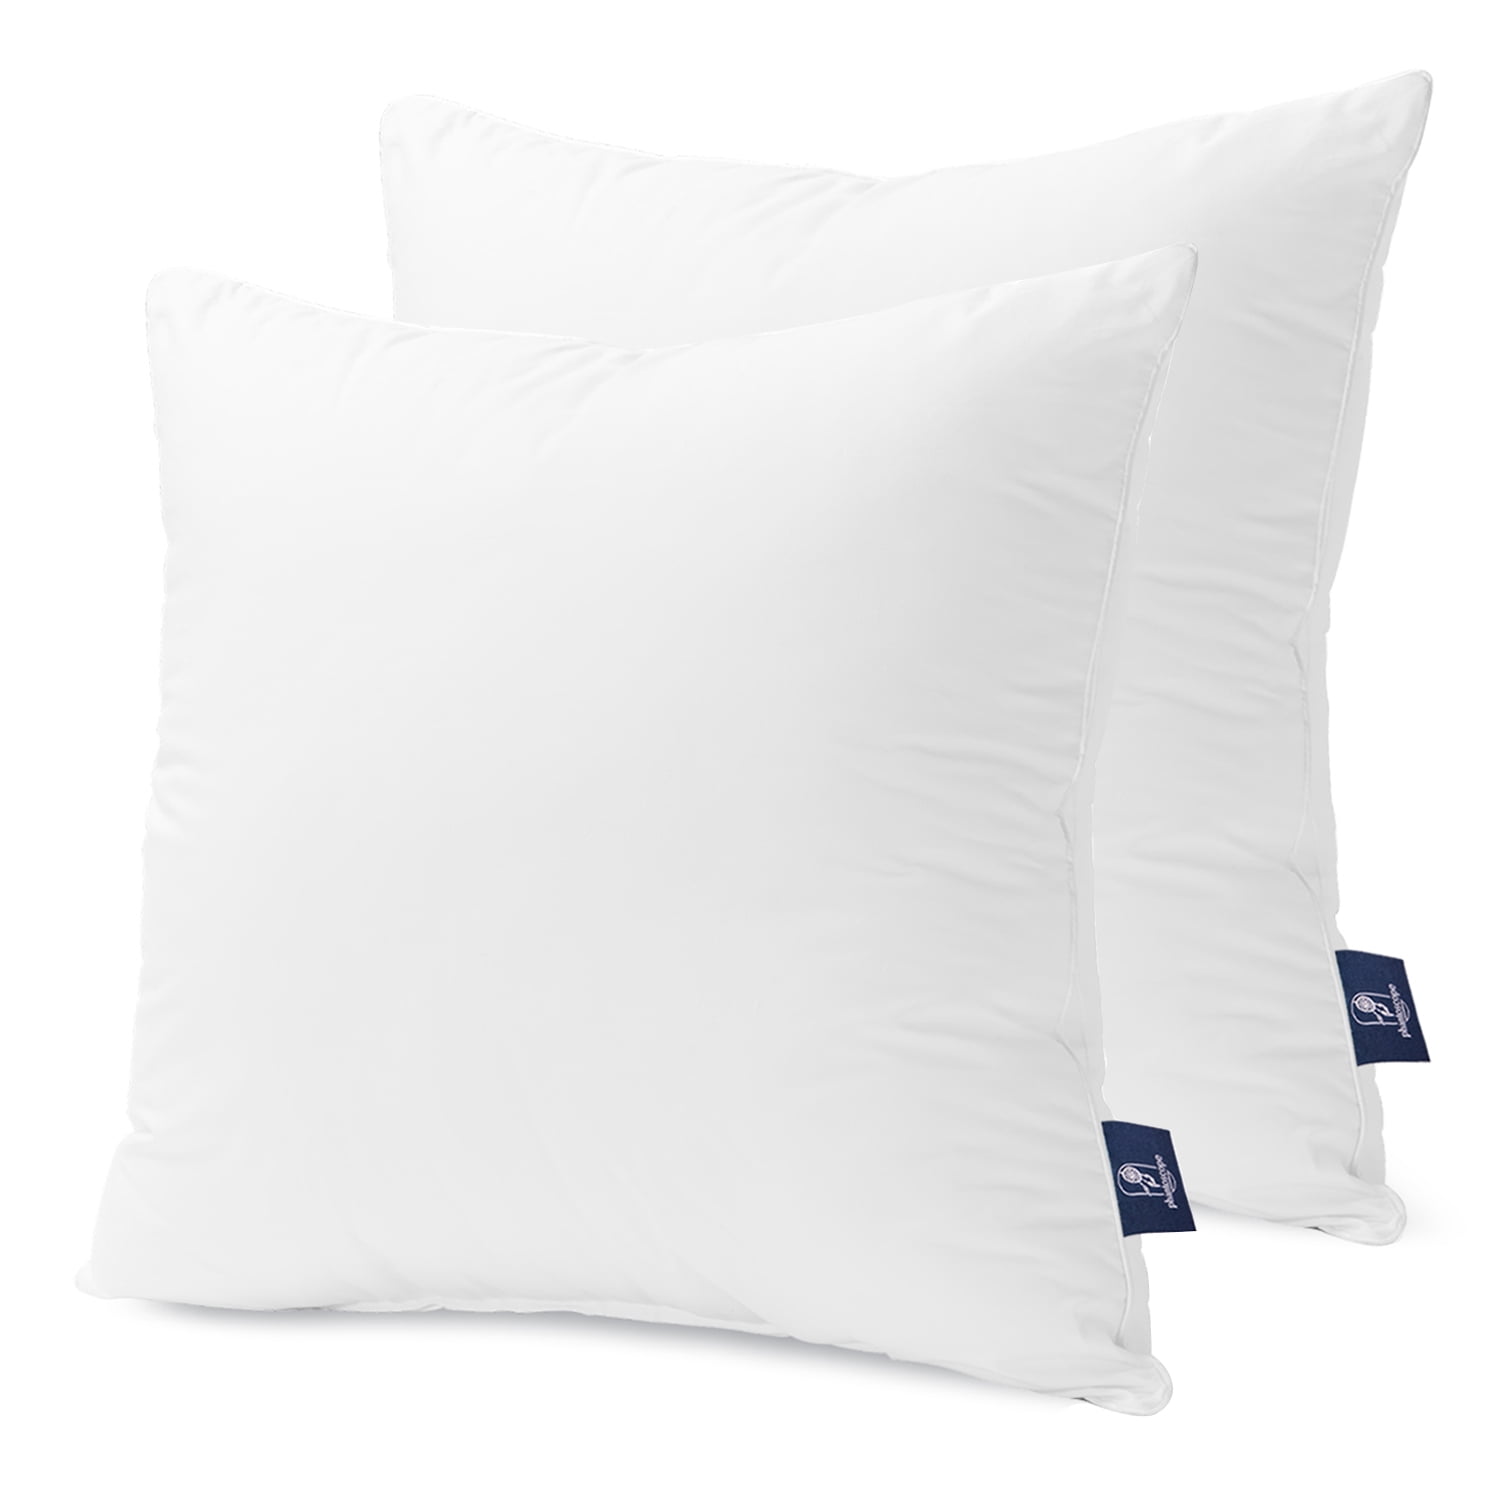 Utopia Bedding Throw Pillow Inserts (Set Of 4, White), 22 X 22 Inches  Pillow Inserts For Sofa, Bed And Couch Decorative Stuffer